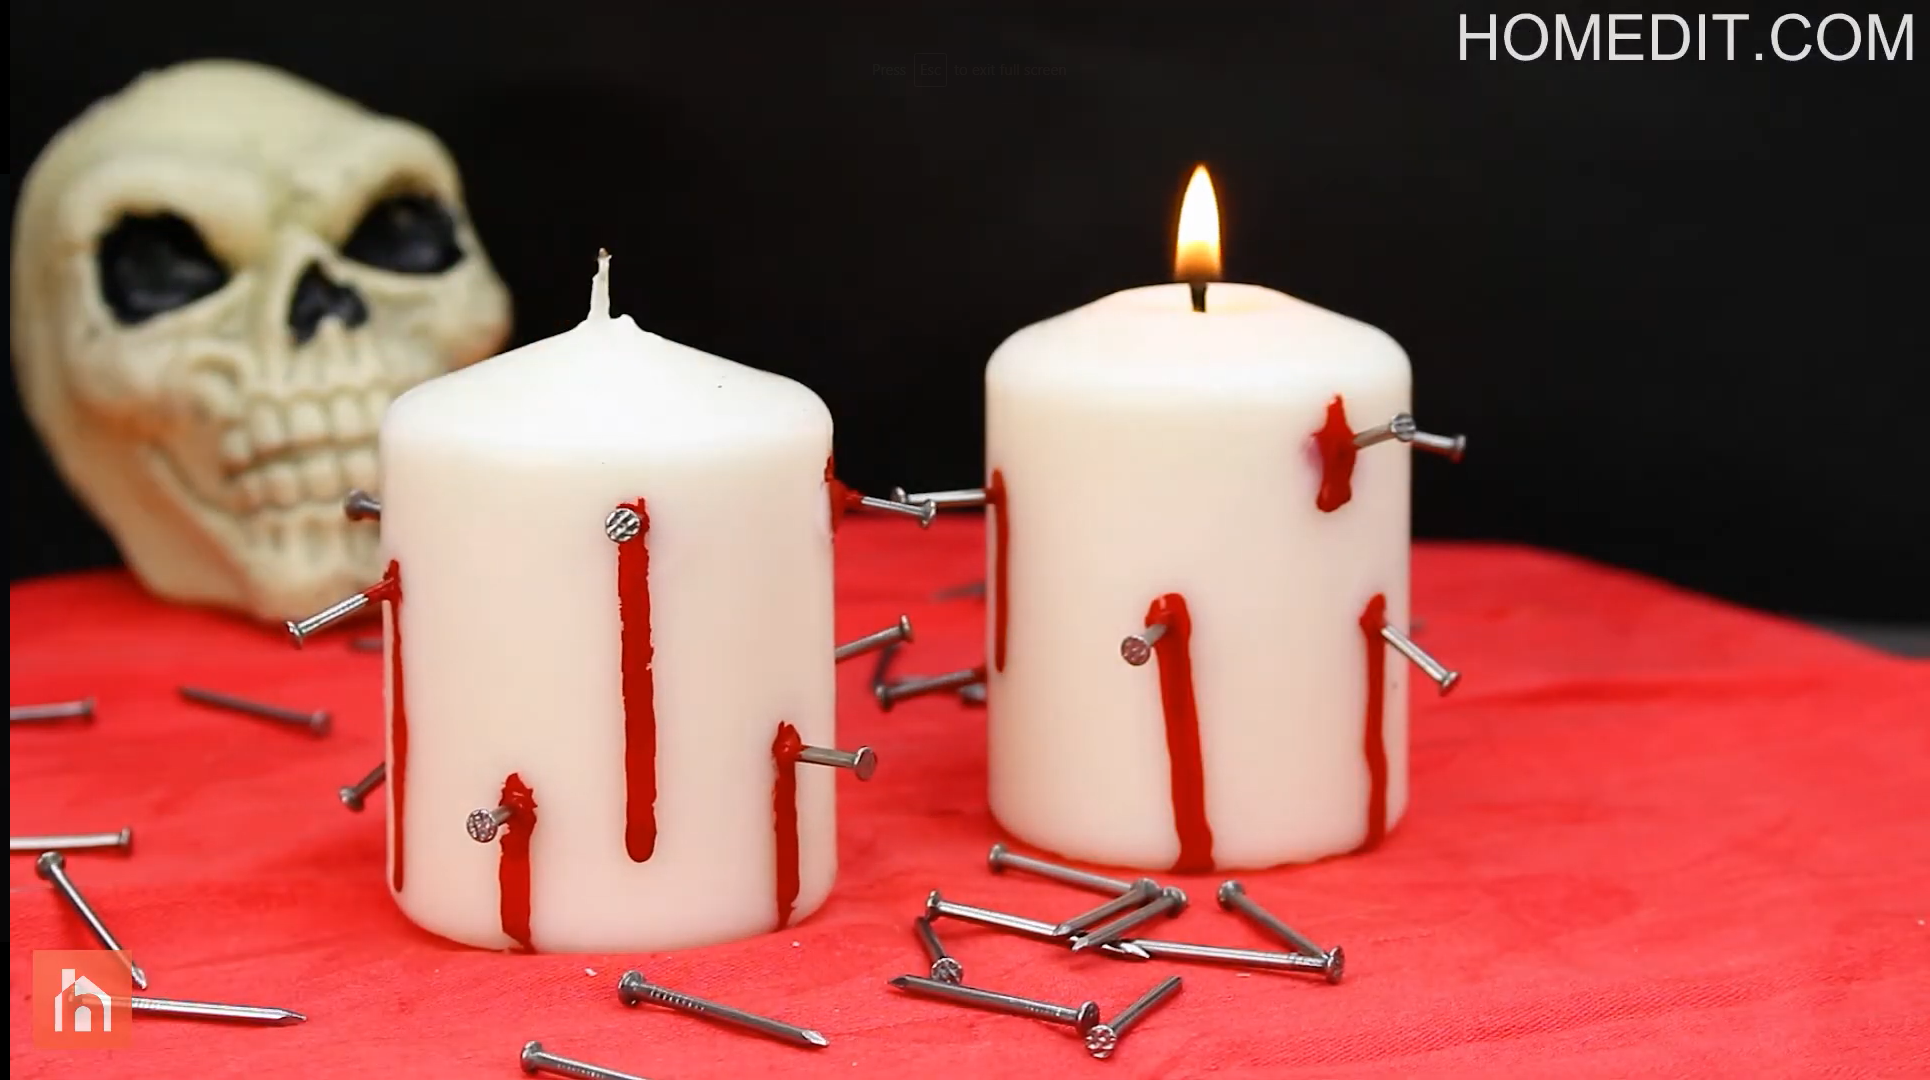 Creepy candles with bloody nails halloween house decorations ideas